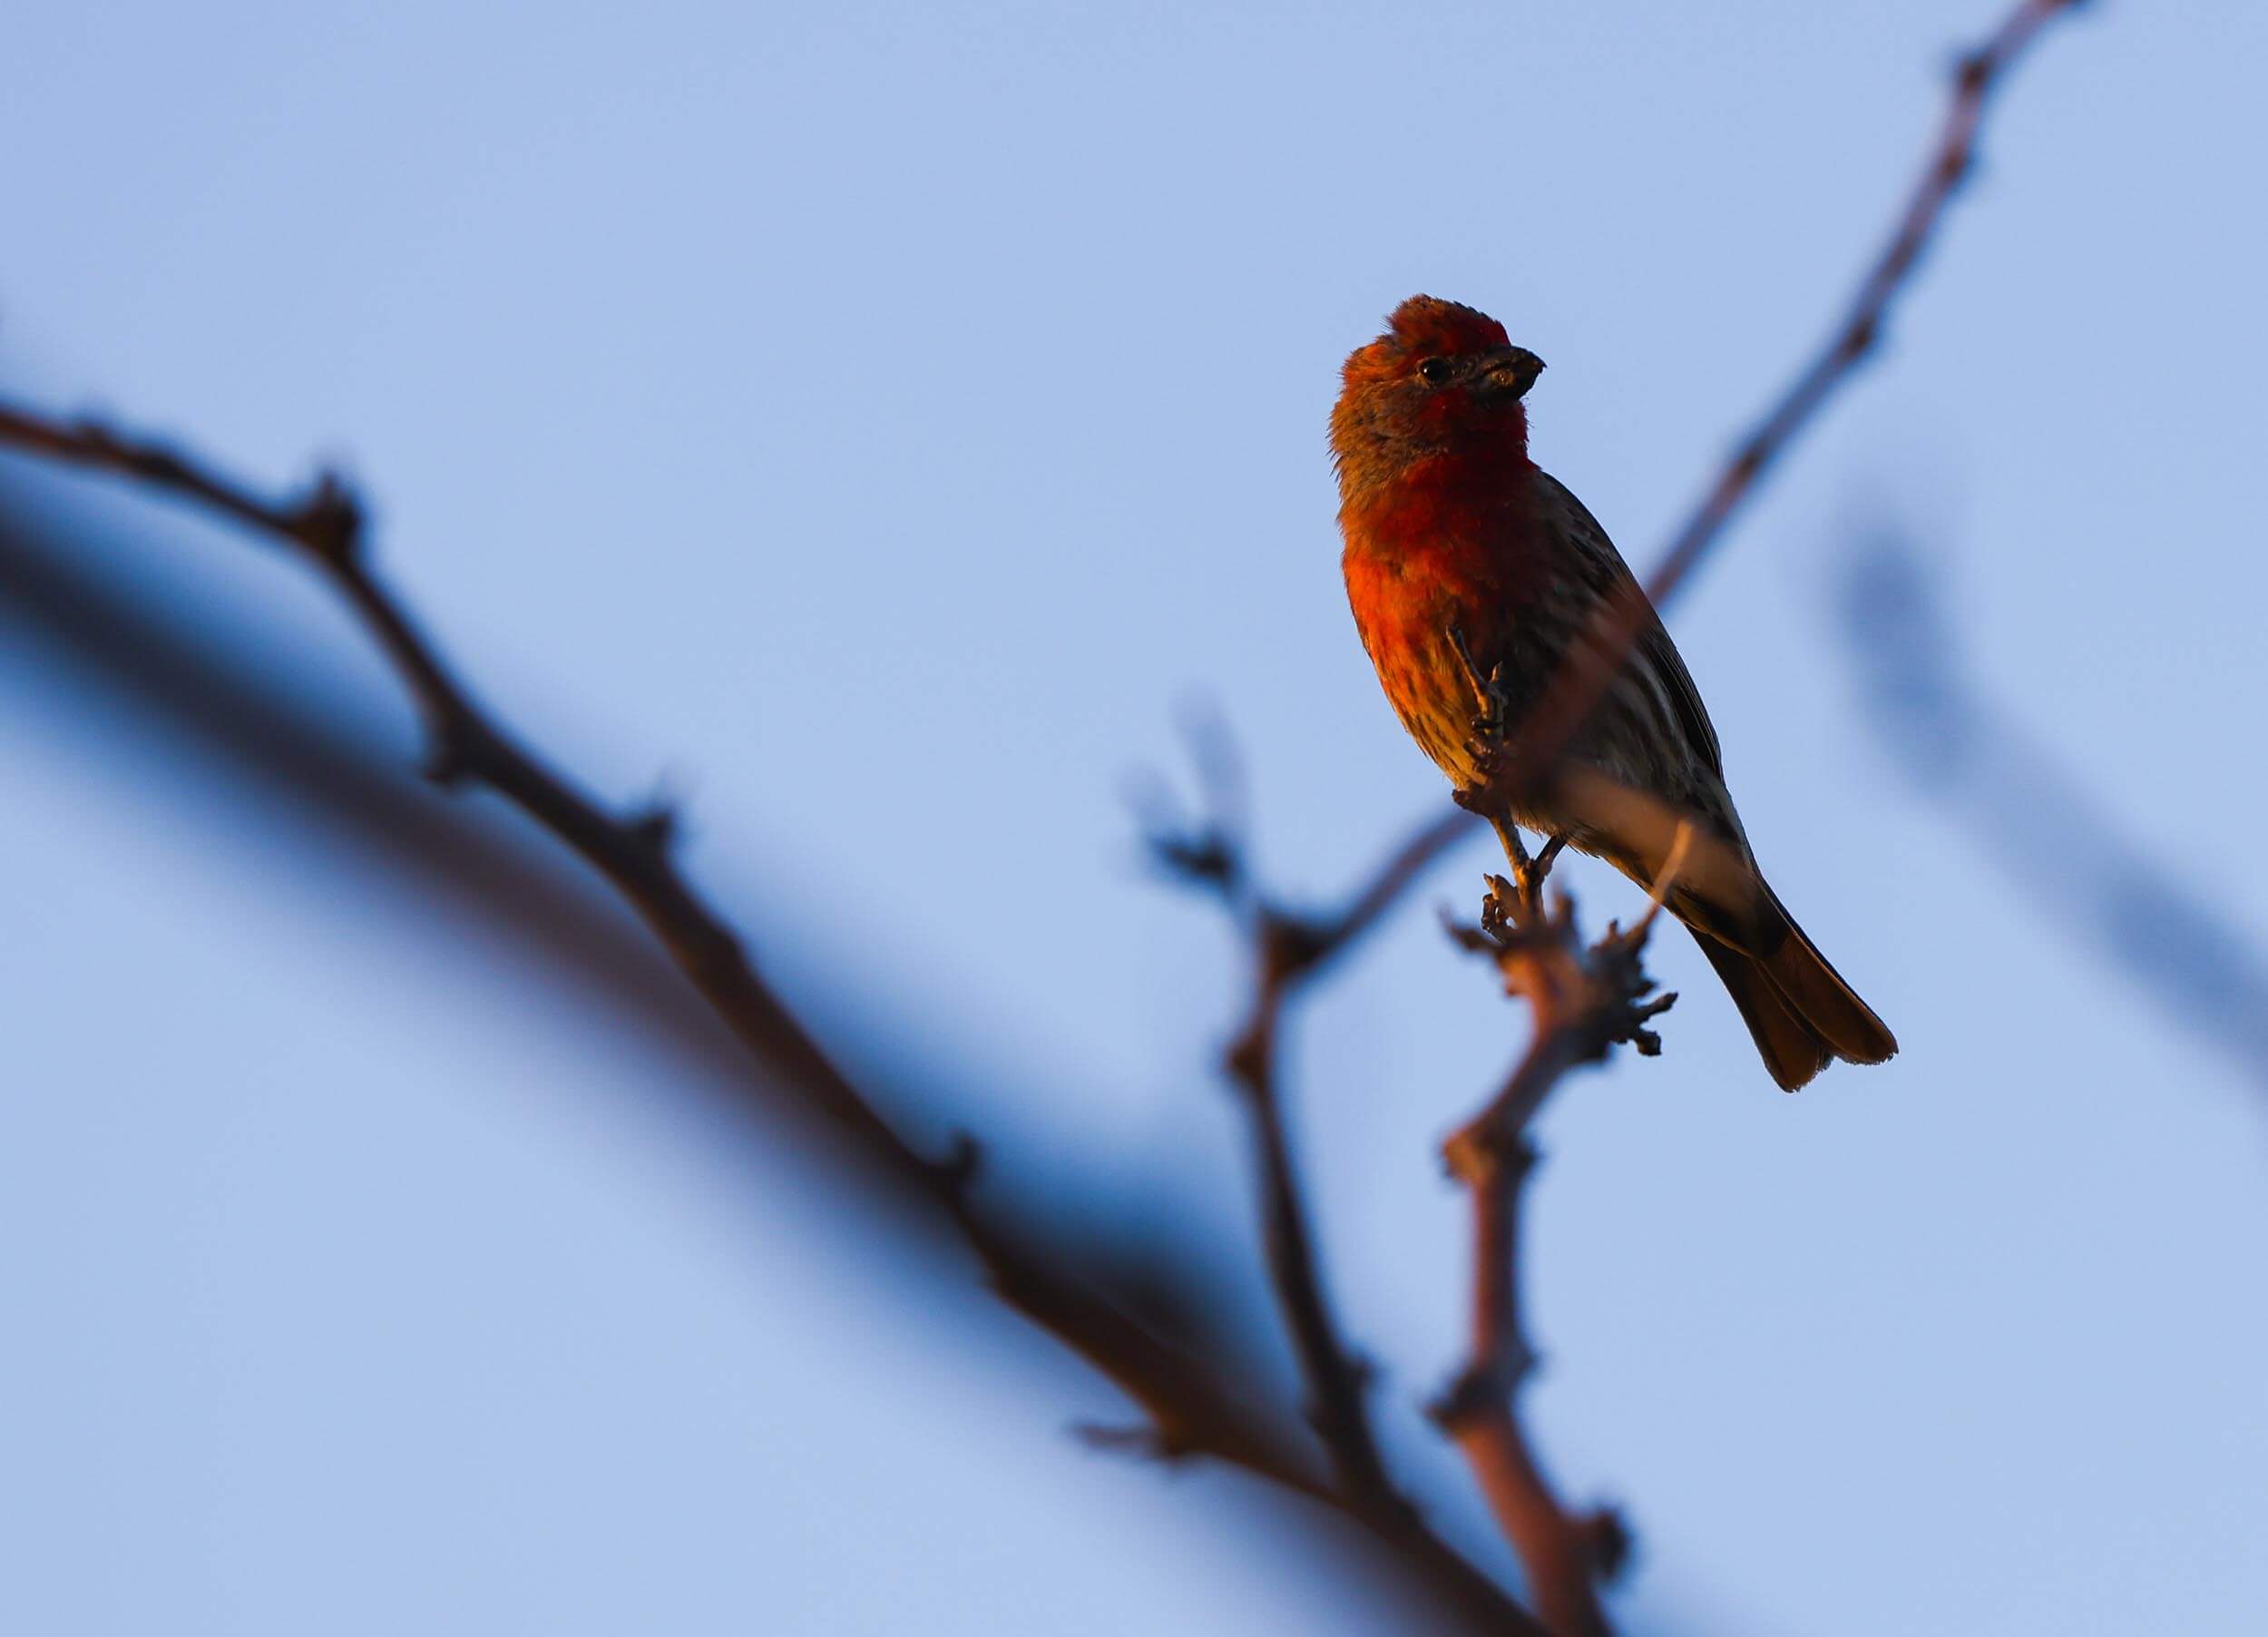 closeup of a red bird perched in a branch